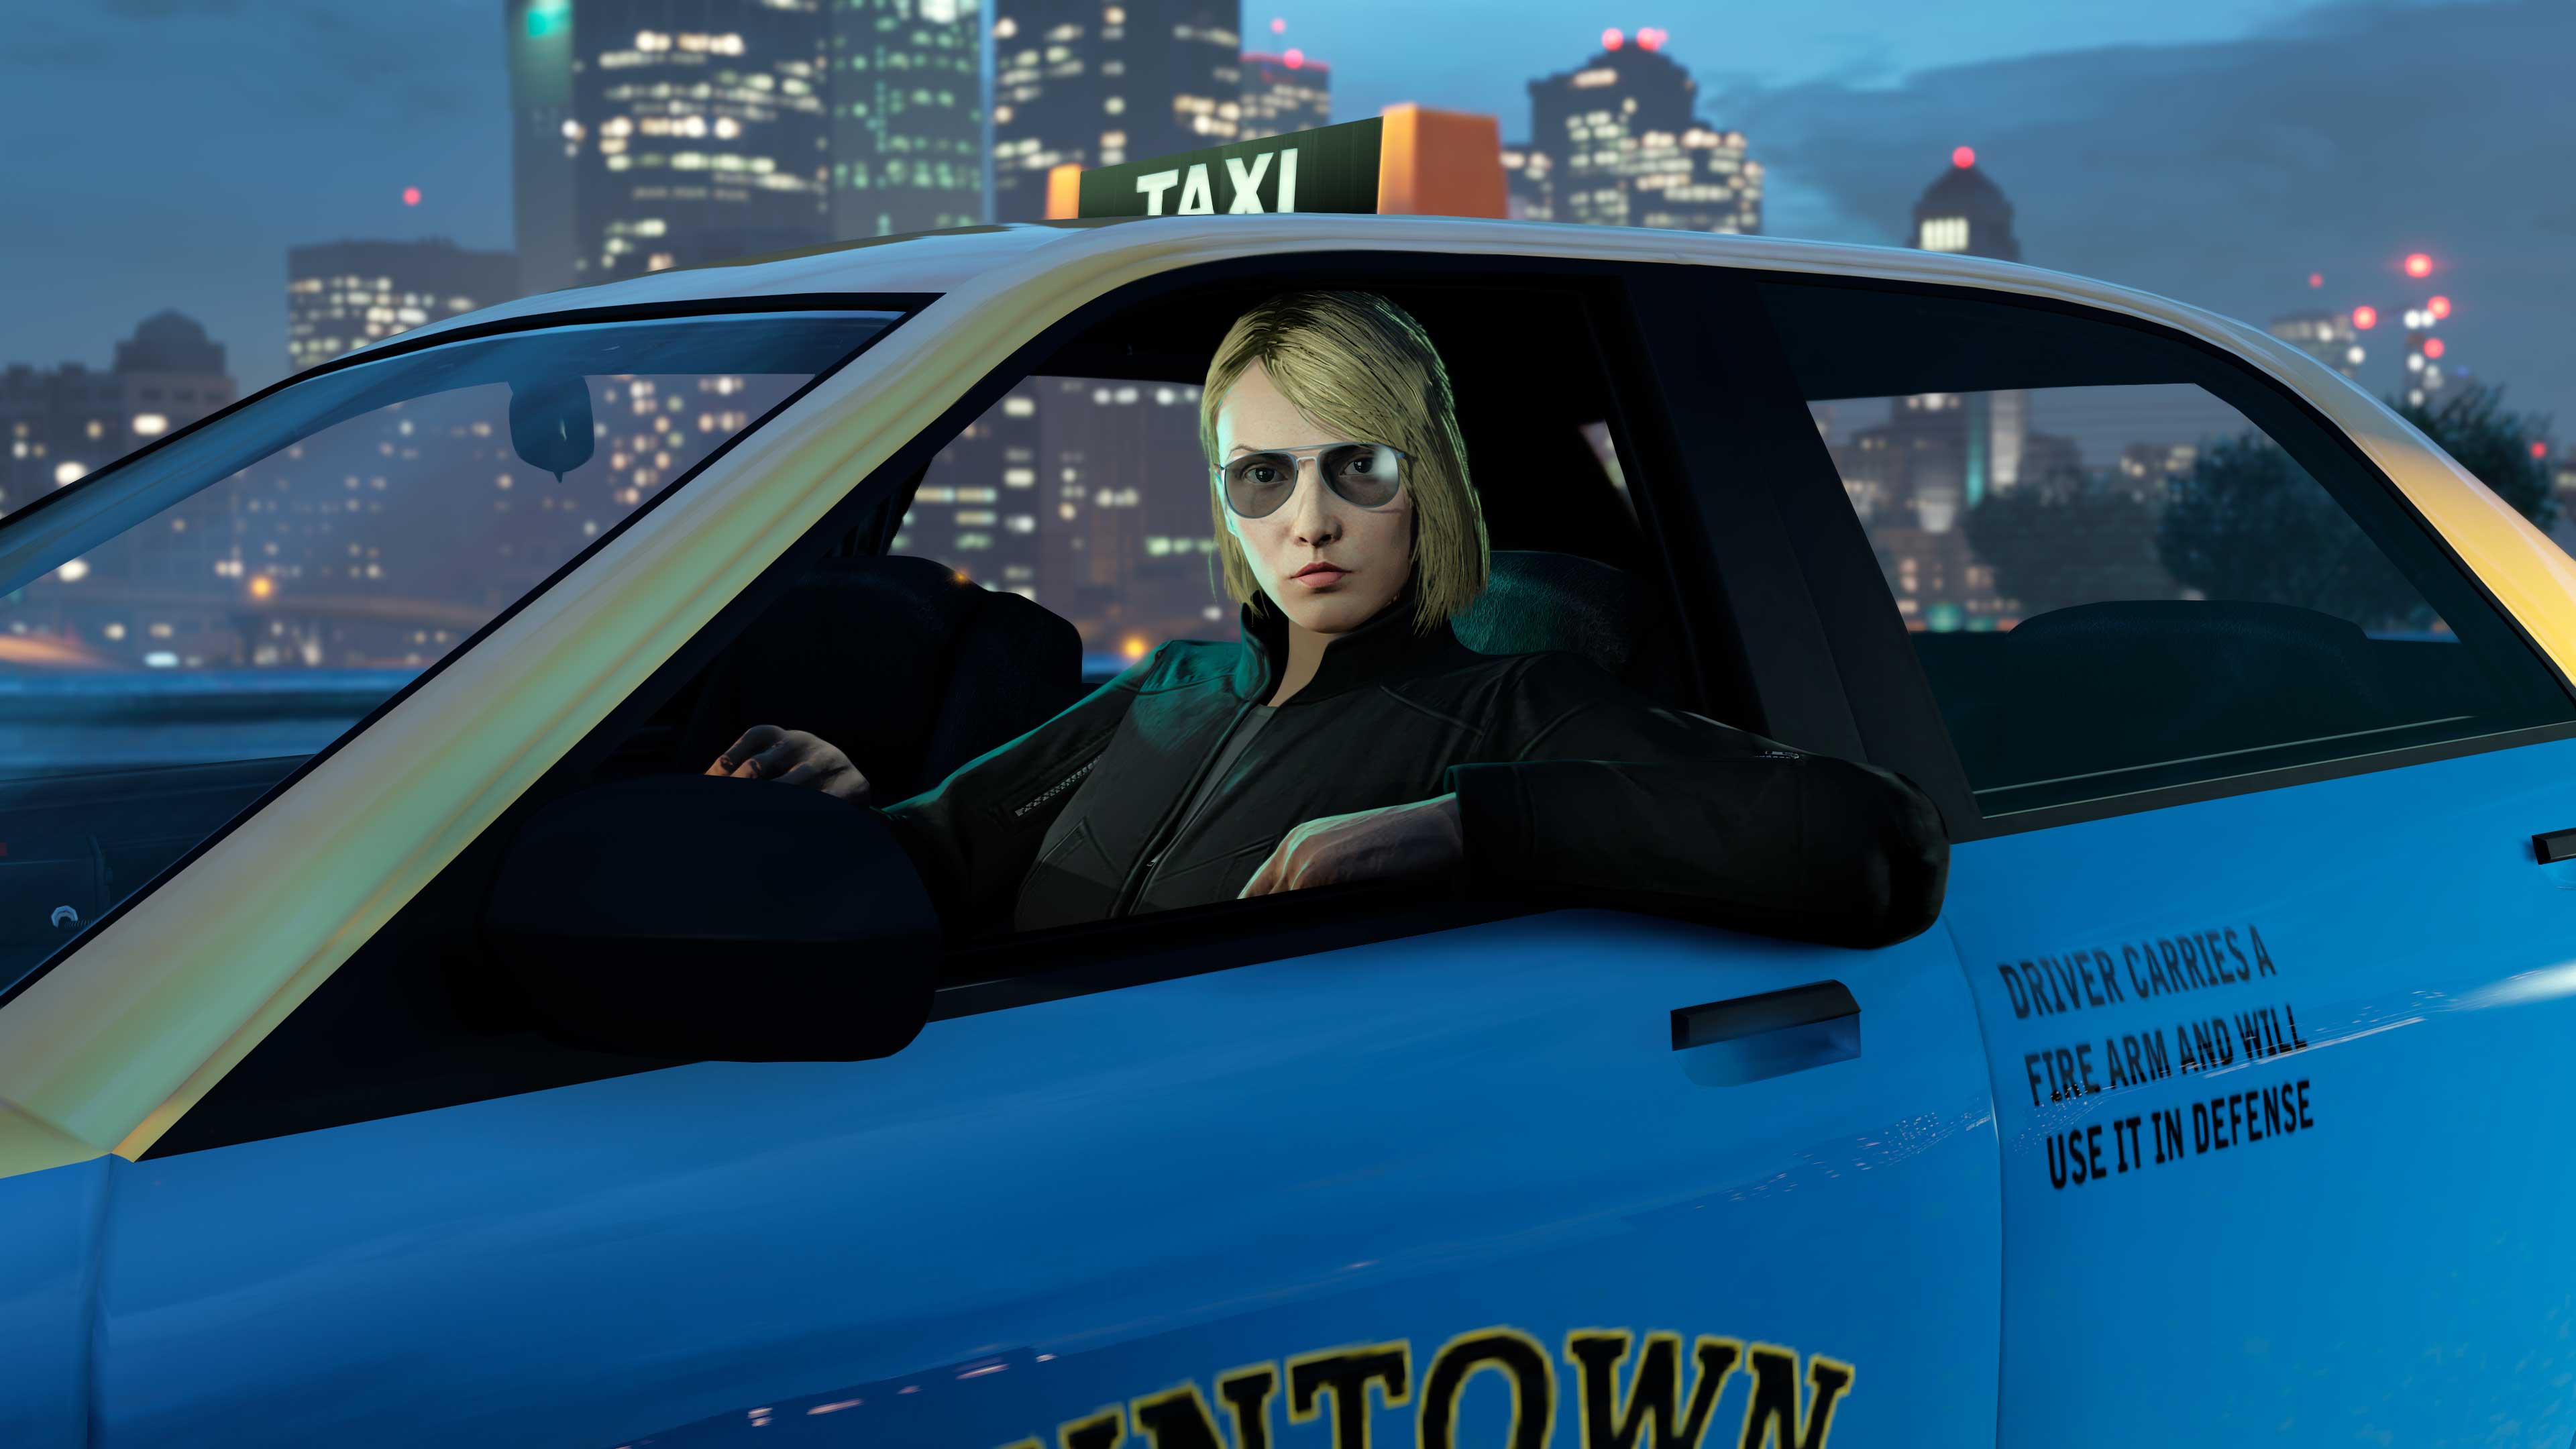 GTA Online New Taxi Work Business Available, Lunar Year Rewards, Bonus on Cargo Sales and More